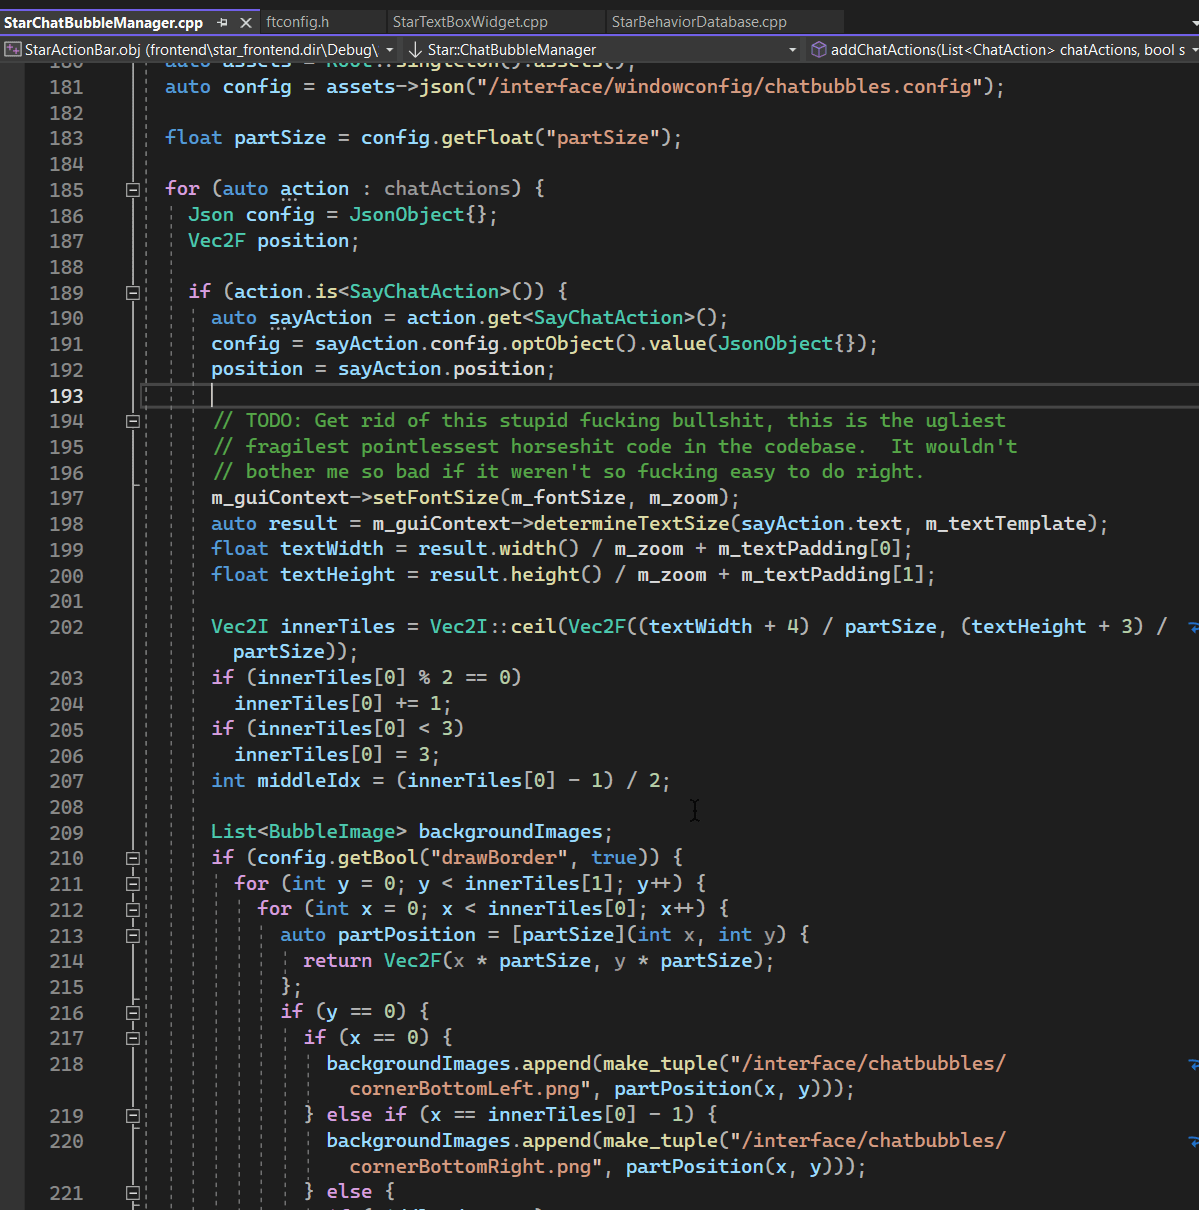 // TODO: Get rid of this stupid fucking bullshit, this is the ugliest
// fragilest pointlessest horseshit code in the codebase.  It wouldn't
// bother me so bad if it weren't so fucking easy to do right.